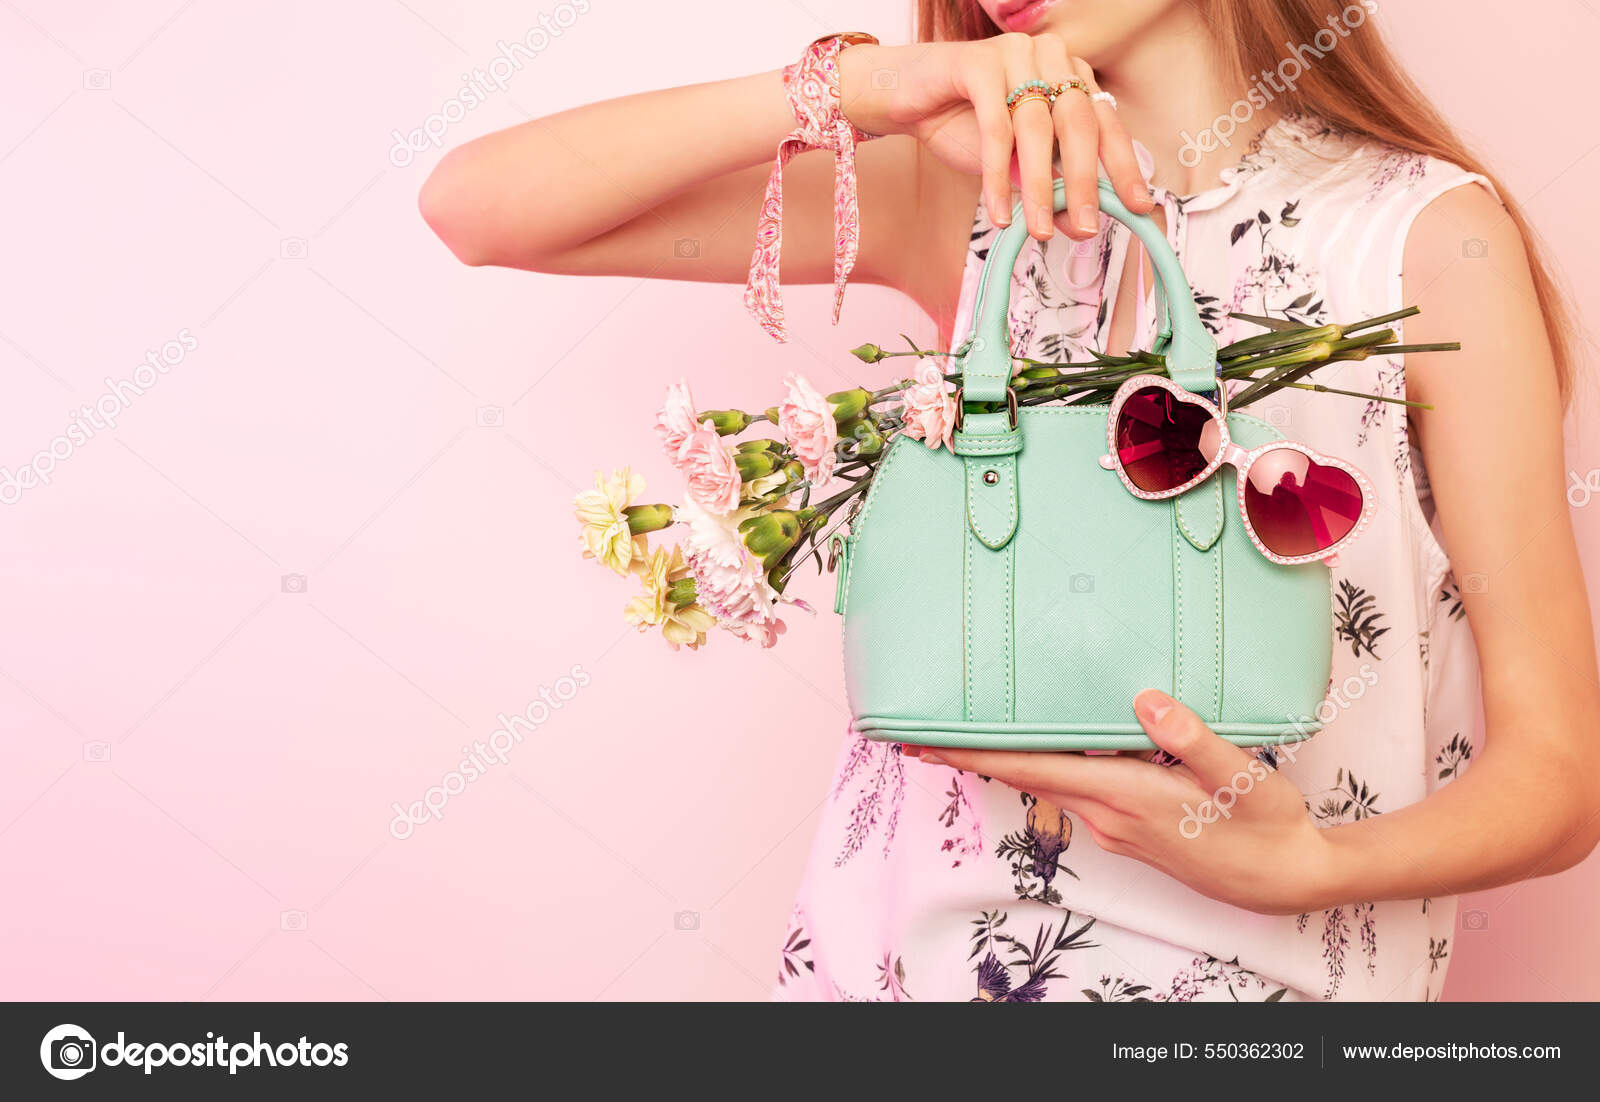 Woman holding purse Stock Photos, Royalty Free Woman holding purse Images |  Depositphotos